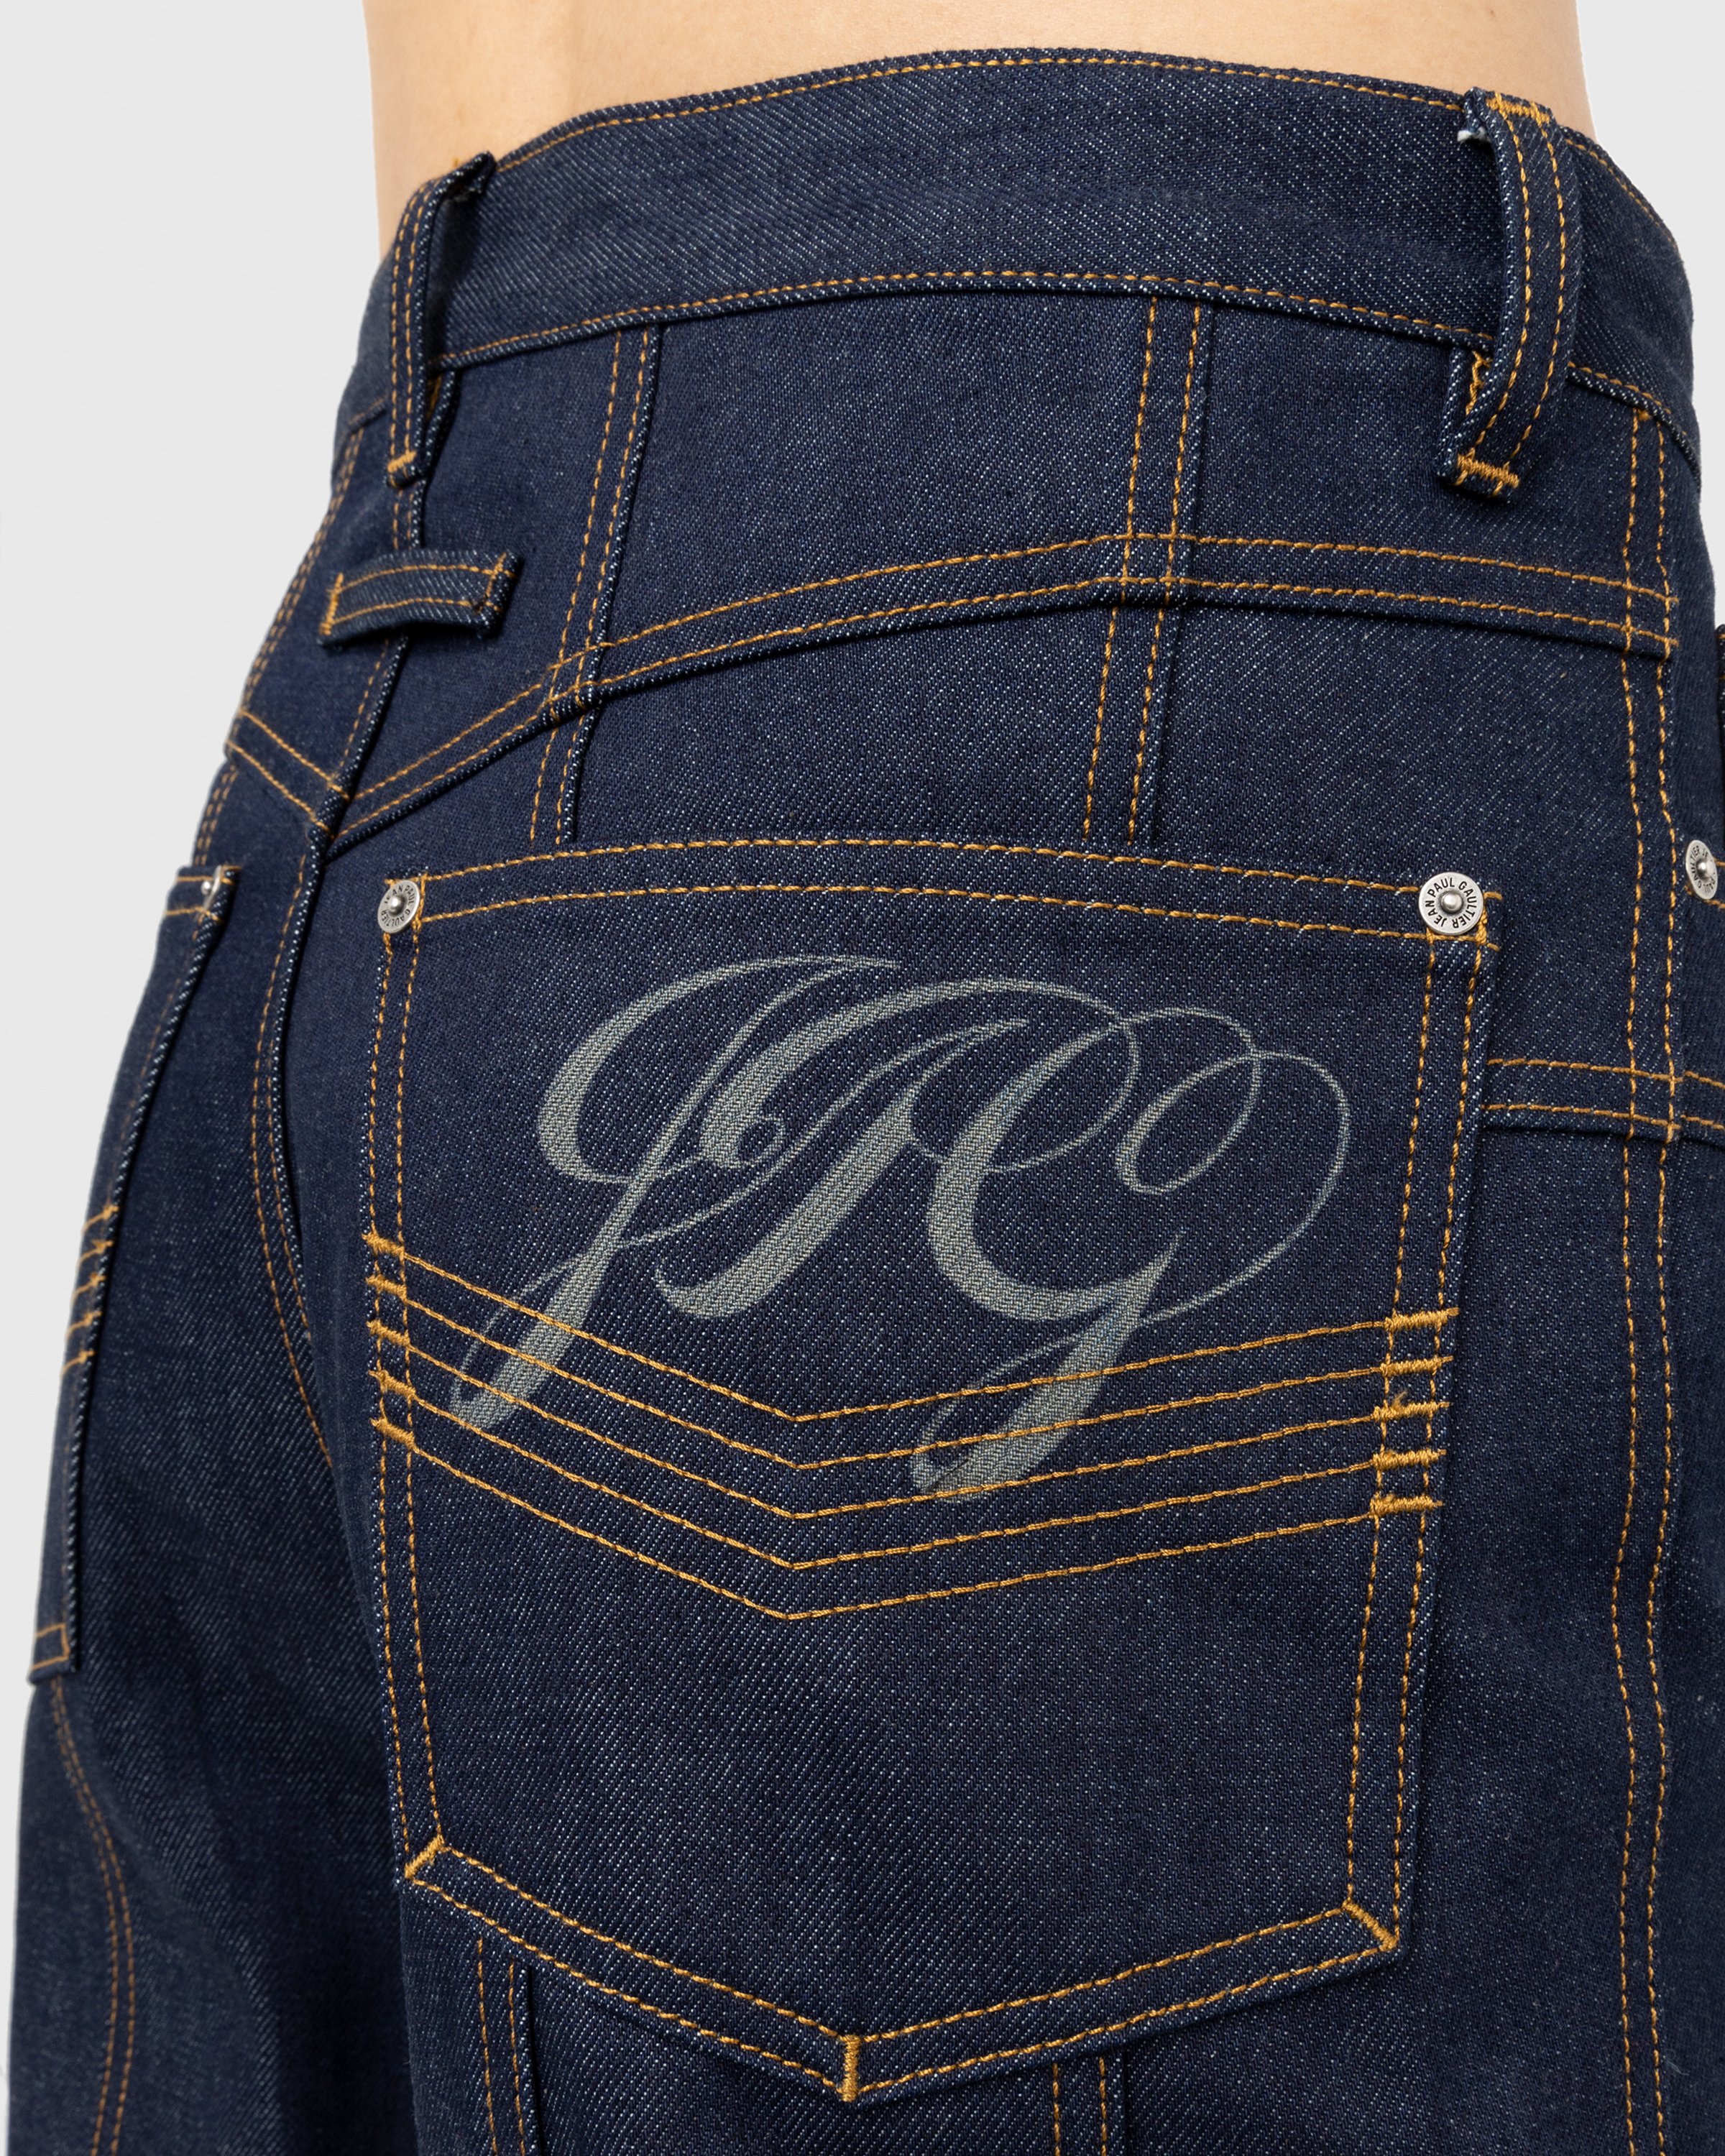 Jean Paul Gaultier - Raw Low-Rise Jeans Indigo - Clothing - Blue - Image 5